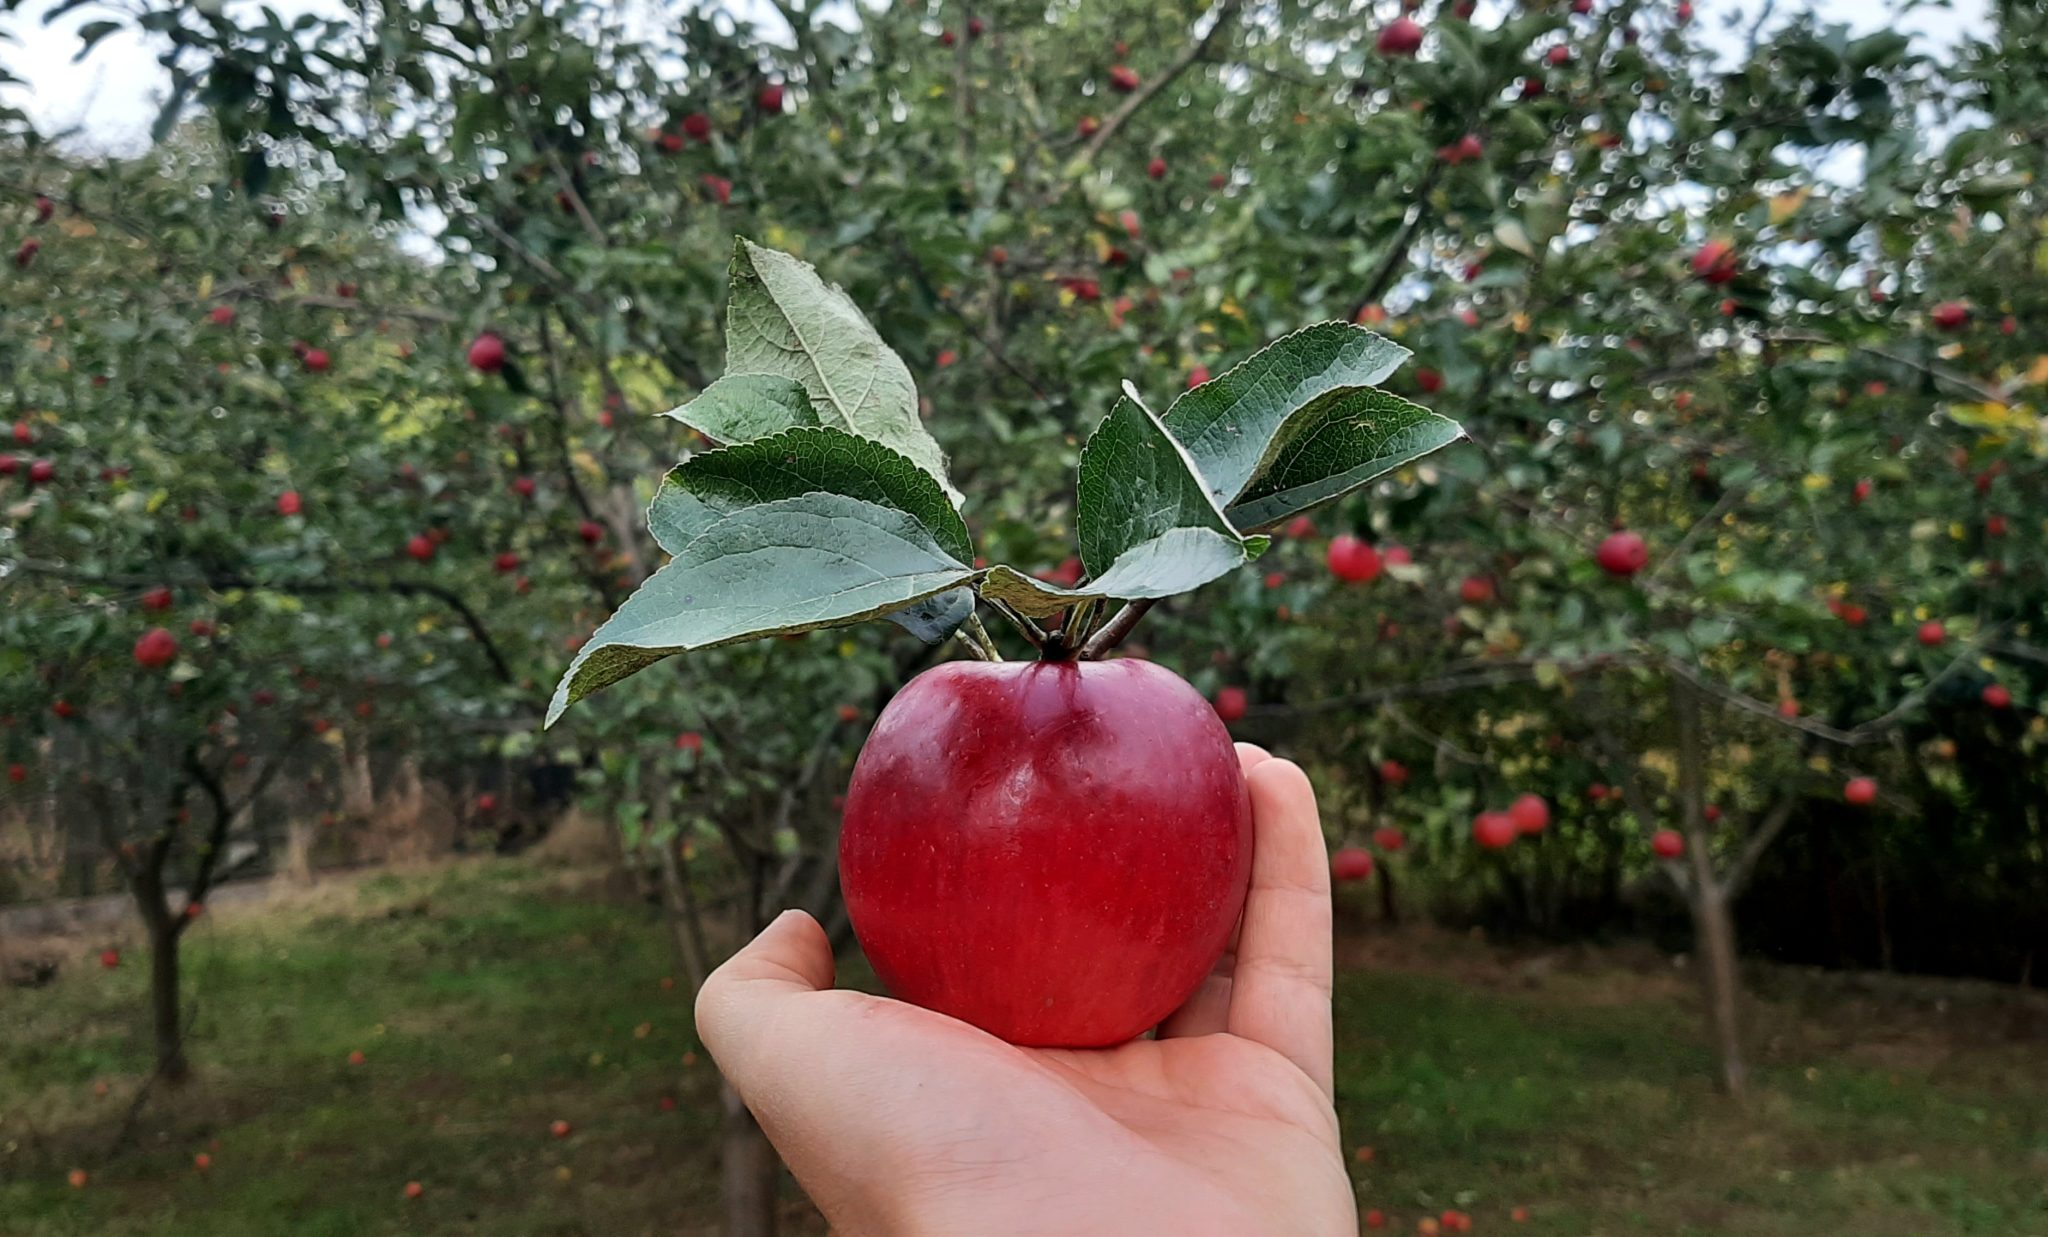 Holding an apple in an apple orchard